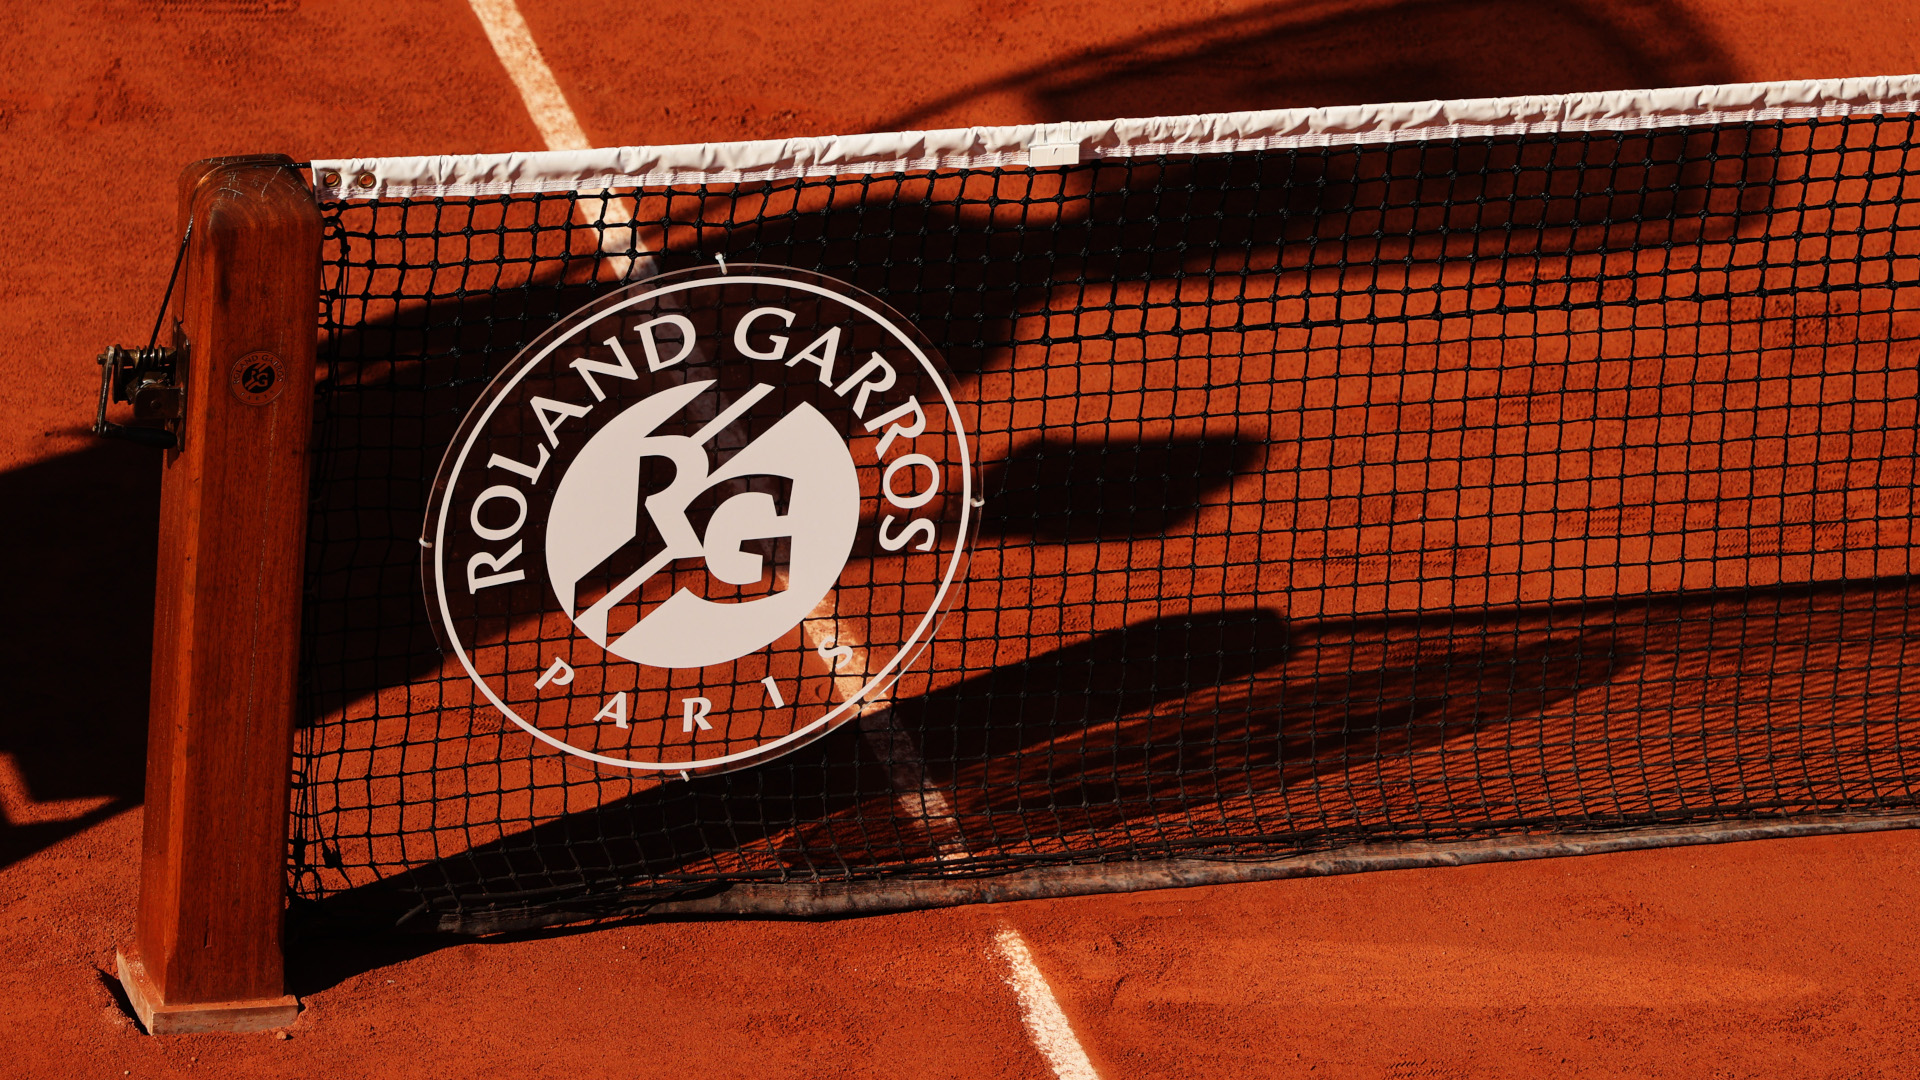 French Open live stream 2022 how to watch finals week tennis at Roland